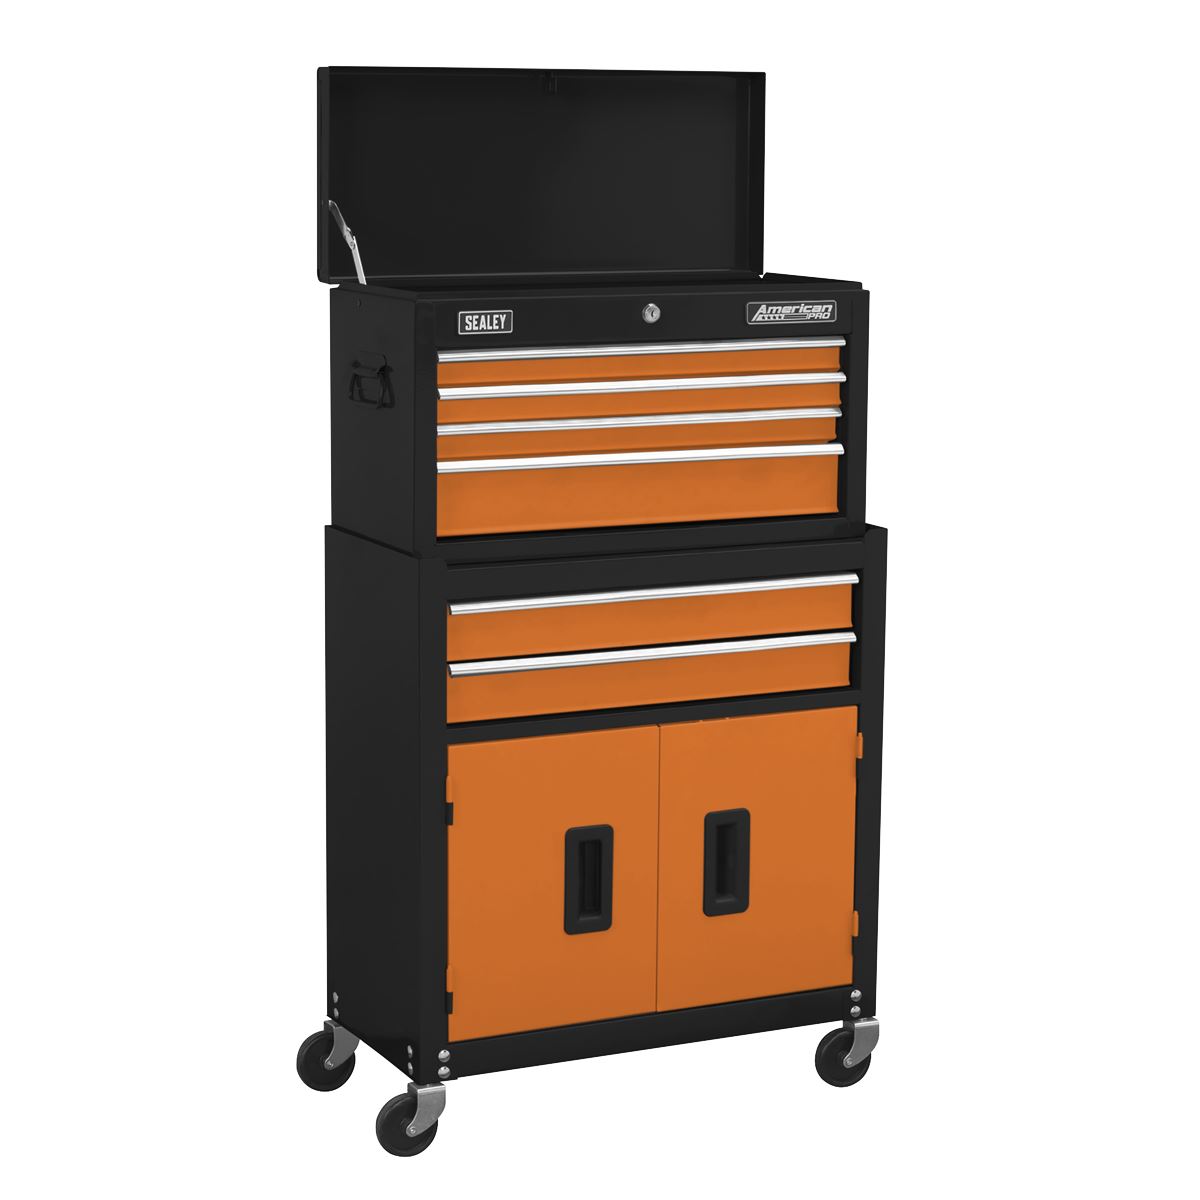 Sealey American Pro Topchest & Rollcab Combination 6 Drawer with Ball-Bearing Slides - Orange